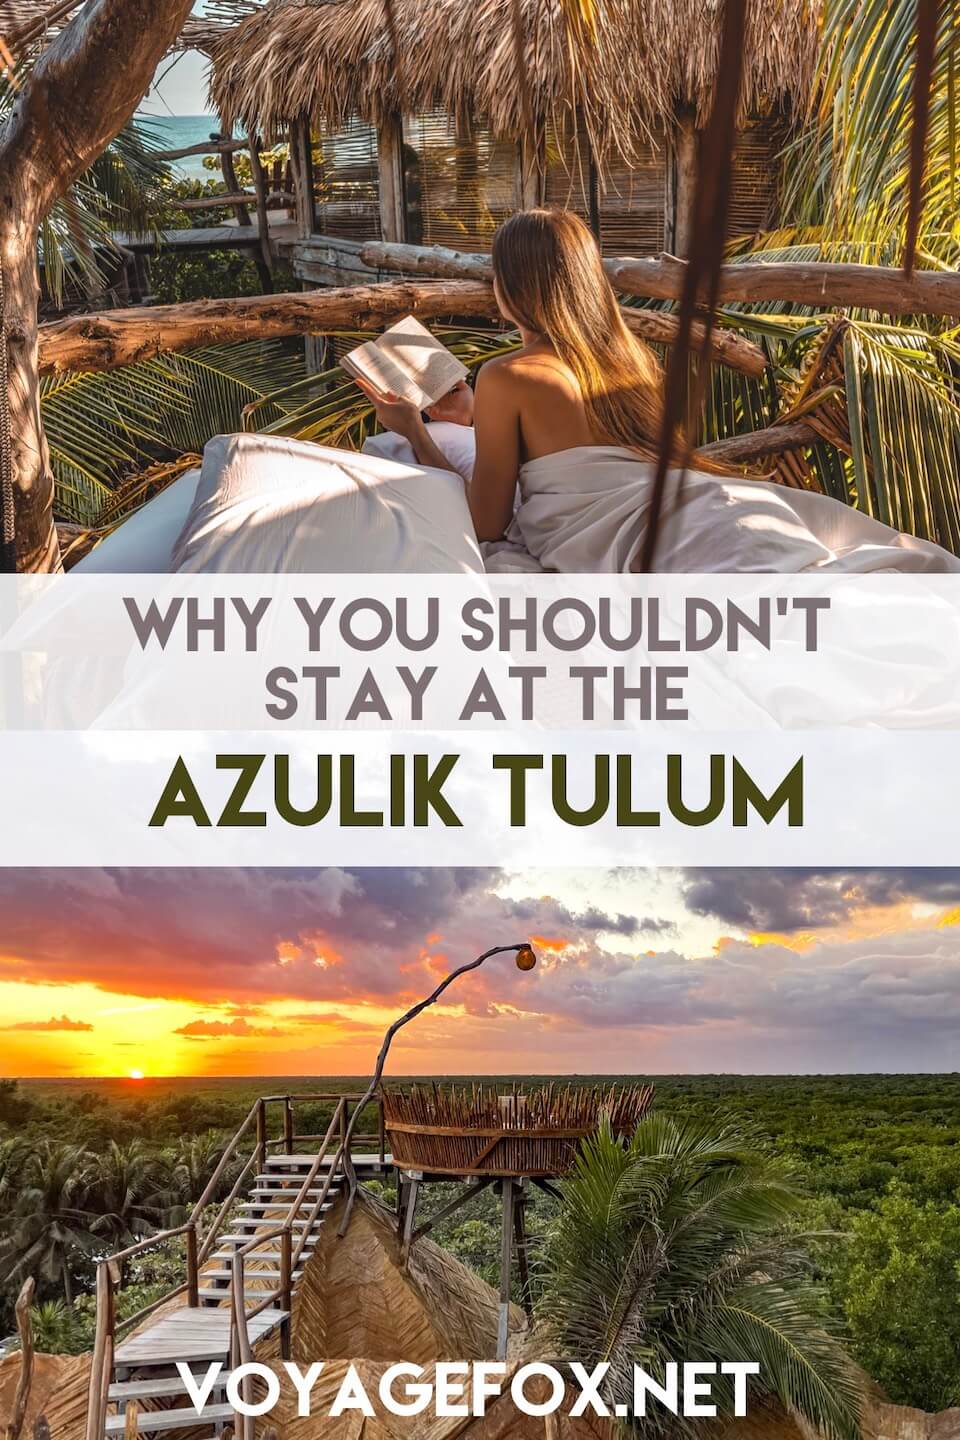 Cover for the Azulik Tulum review